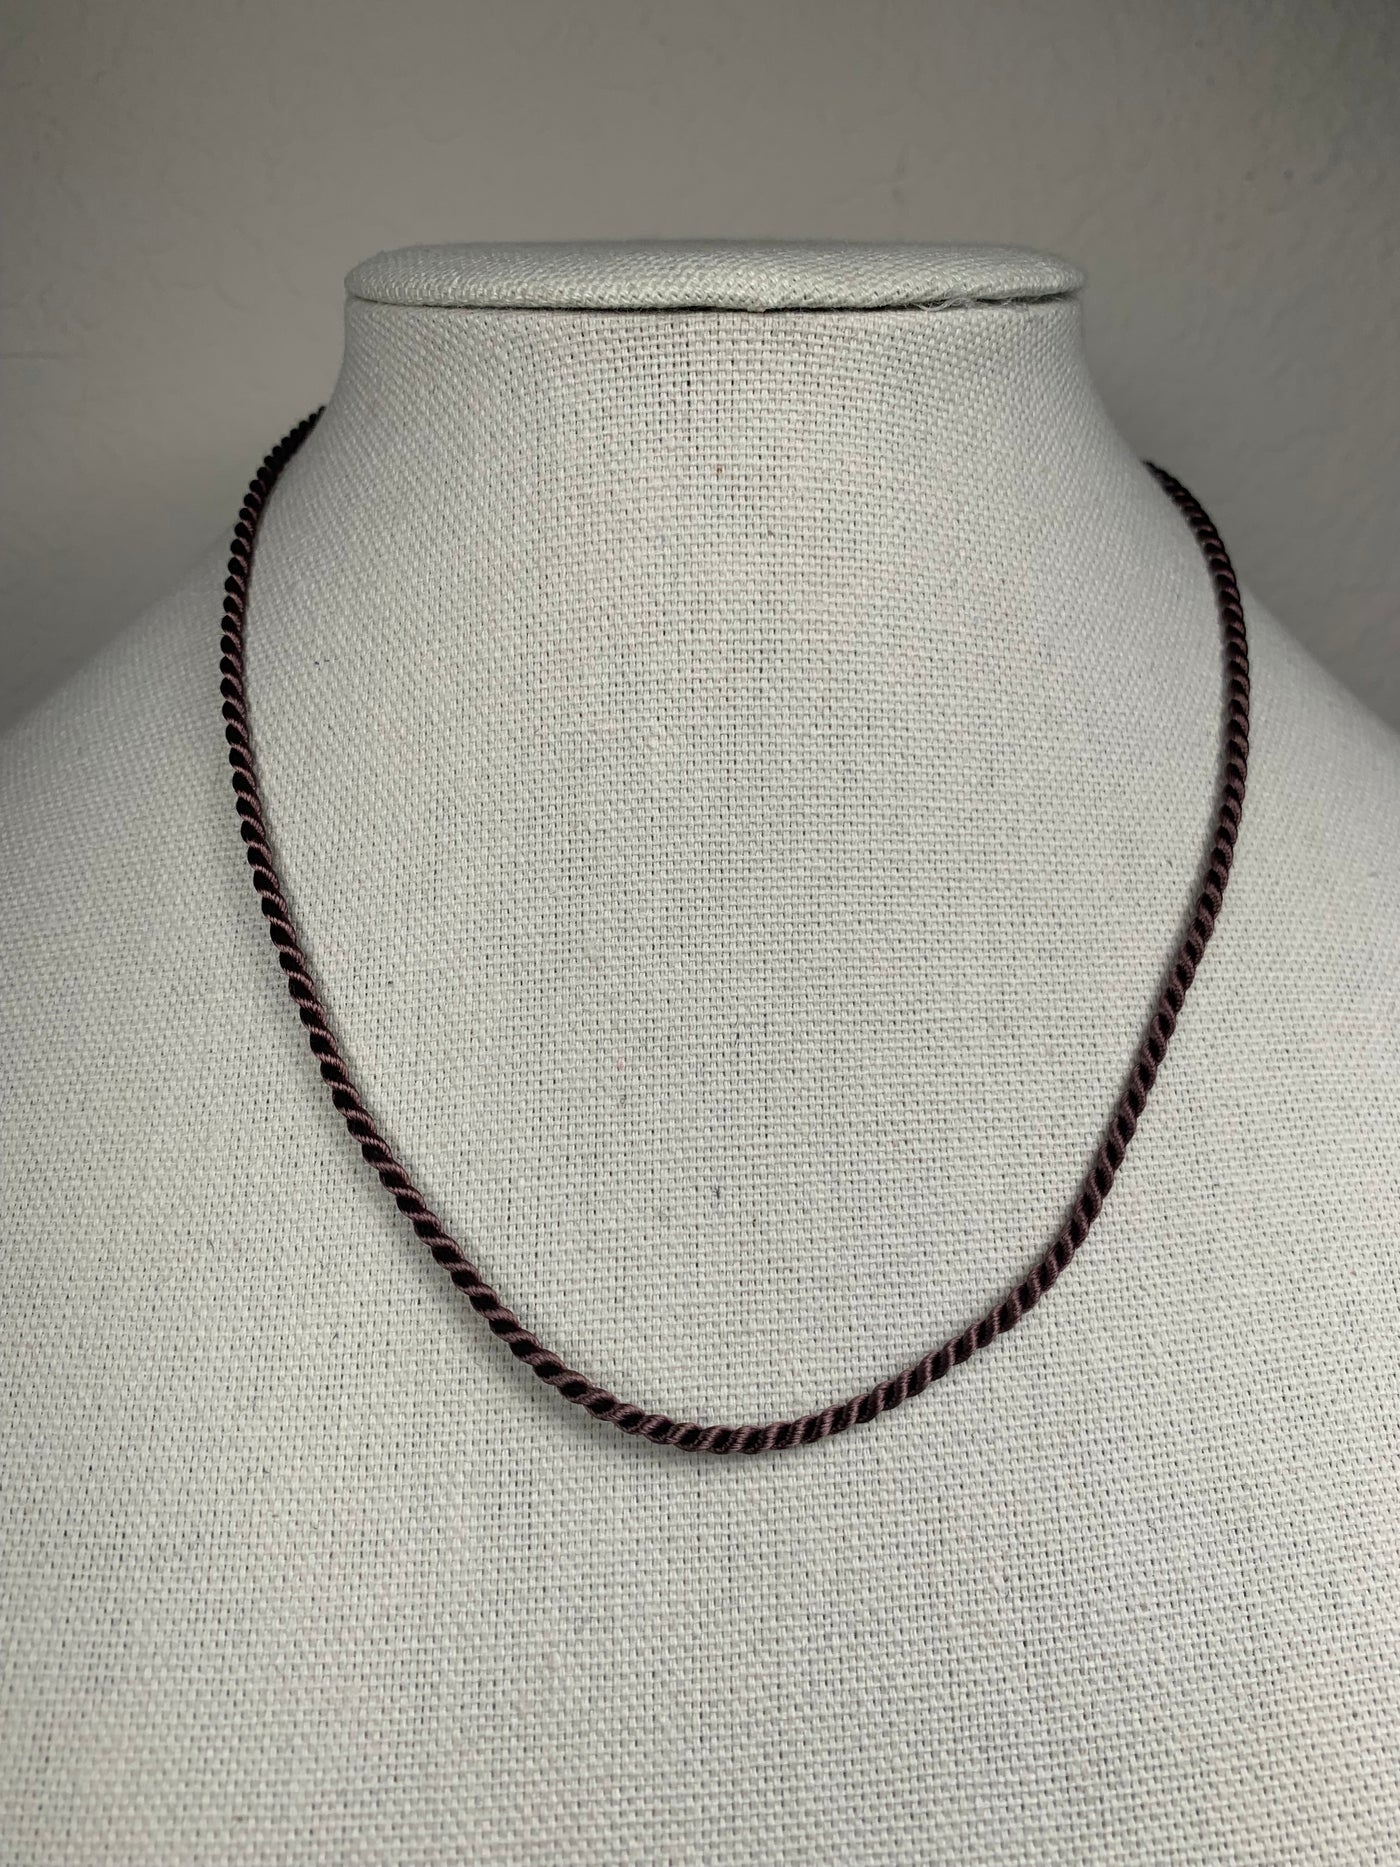 Chocolate Dark Brown Twist Cord Necklace with Silver Clasp Closure